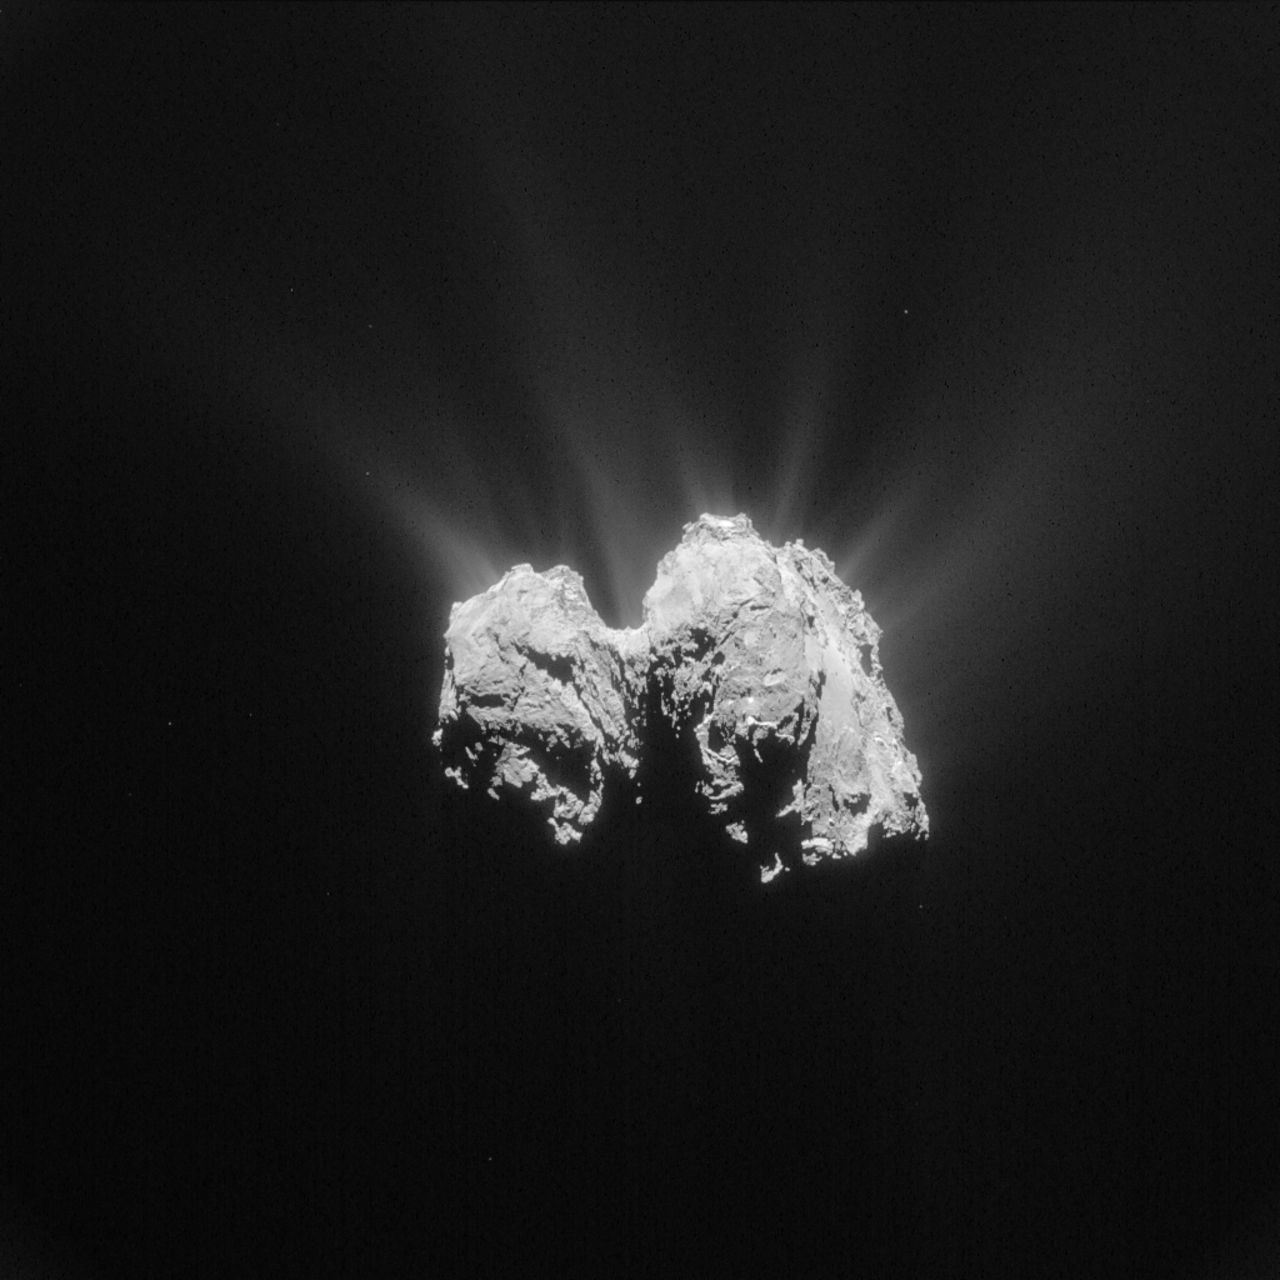 The Rosetta Mission is tracking Comet 67P/Churyumov-Gerasimenko on its orbit around the sun. This image was taken on May 3, 2015 at a distance of about 84 miles (135 km) from the comet's center.